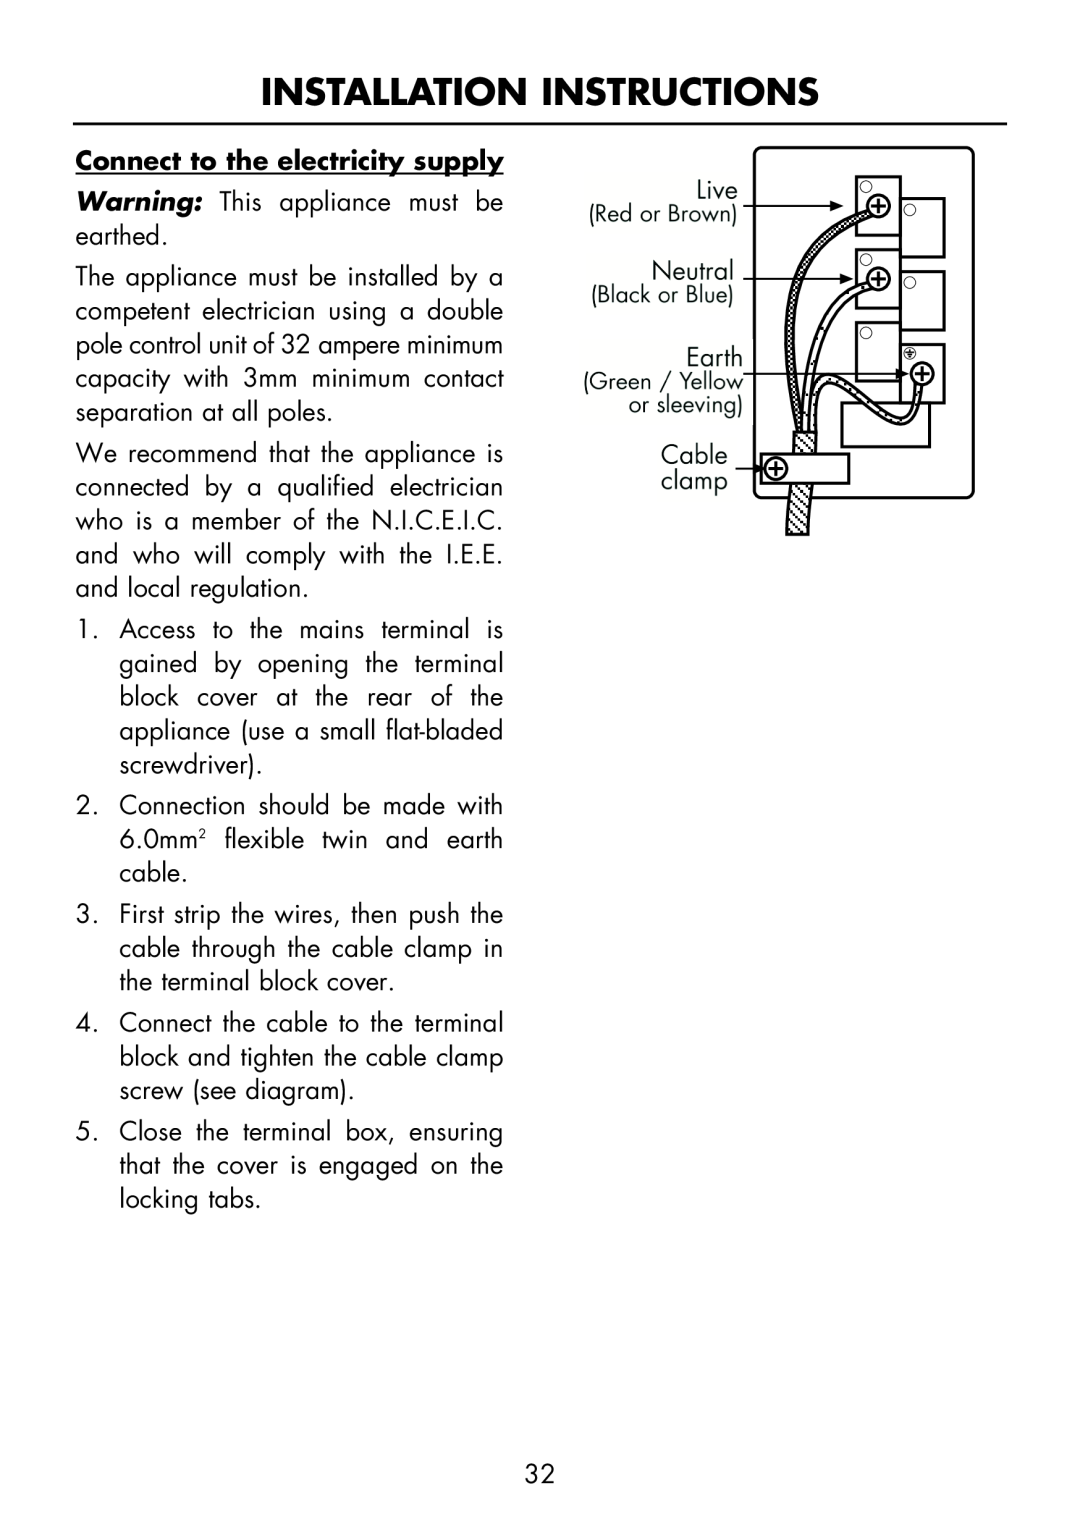 Glen Dimplex Home Appliances Ltd FSE 60 DOP manual Connect to the electricity supply, Installation Instructions 